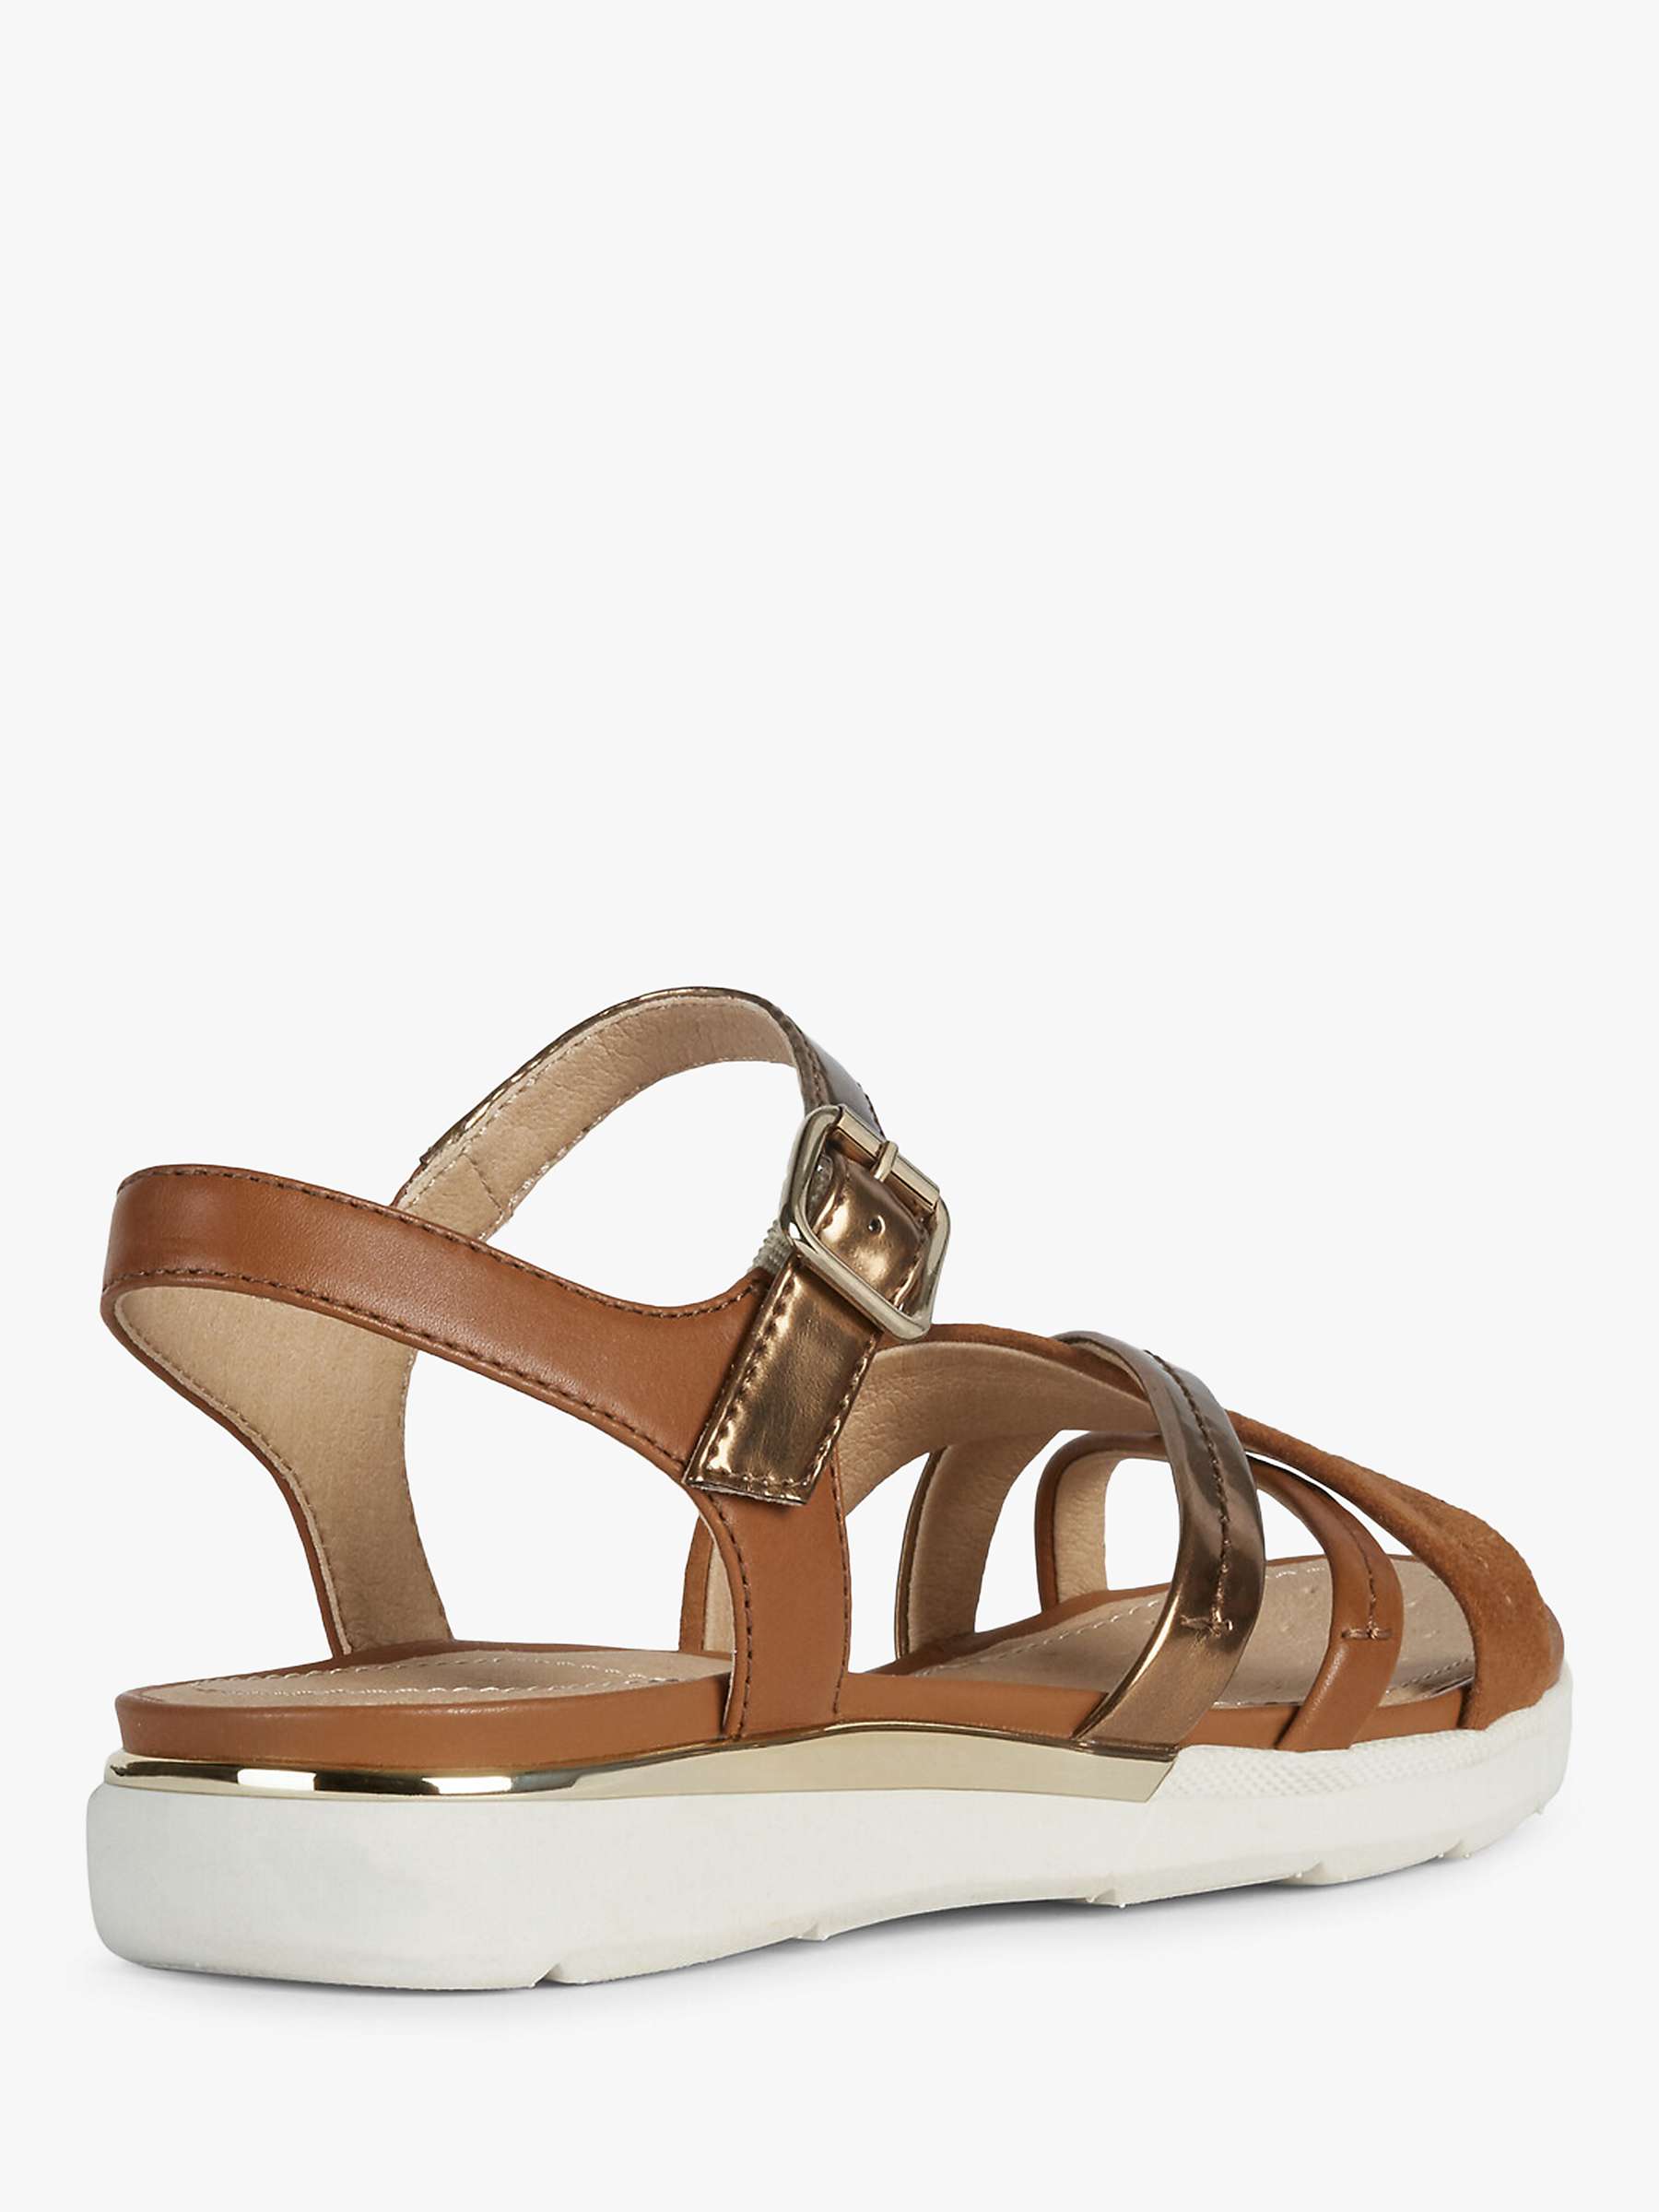 Buy Geox Women's Hiver Leather Cross Over Sandals Online at johnlewis.com